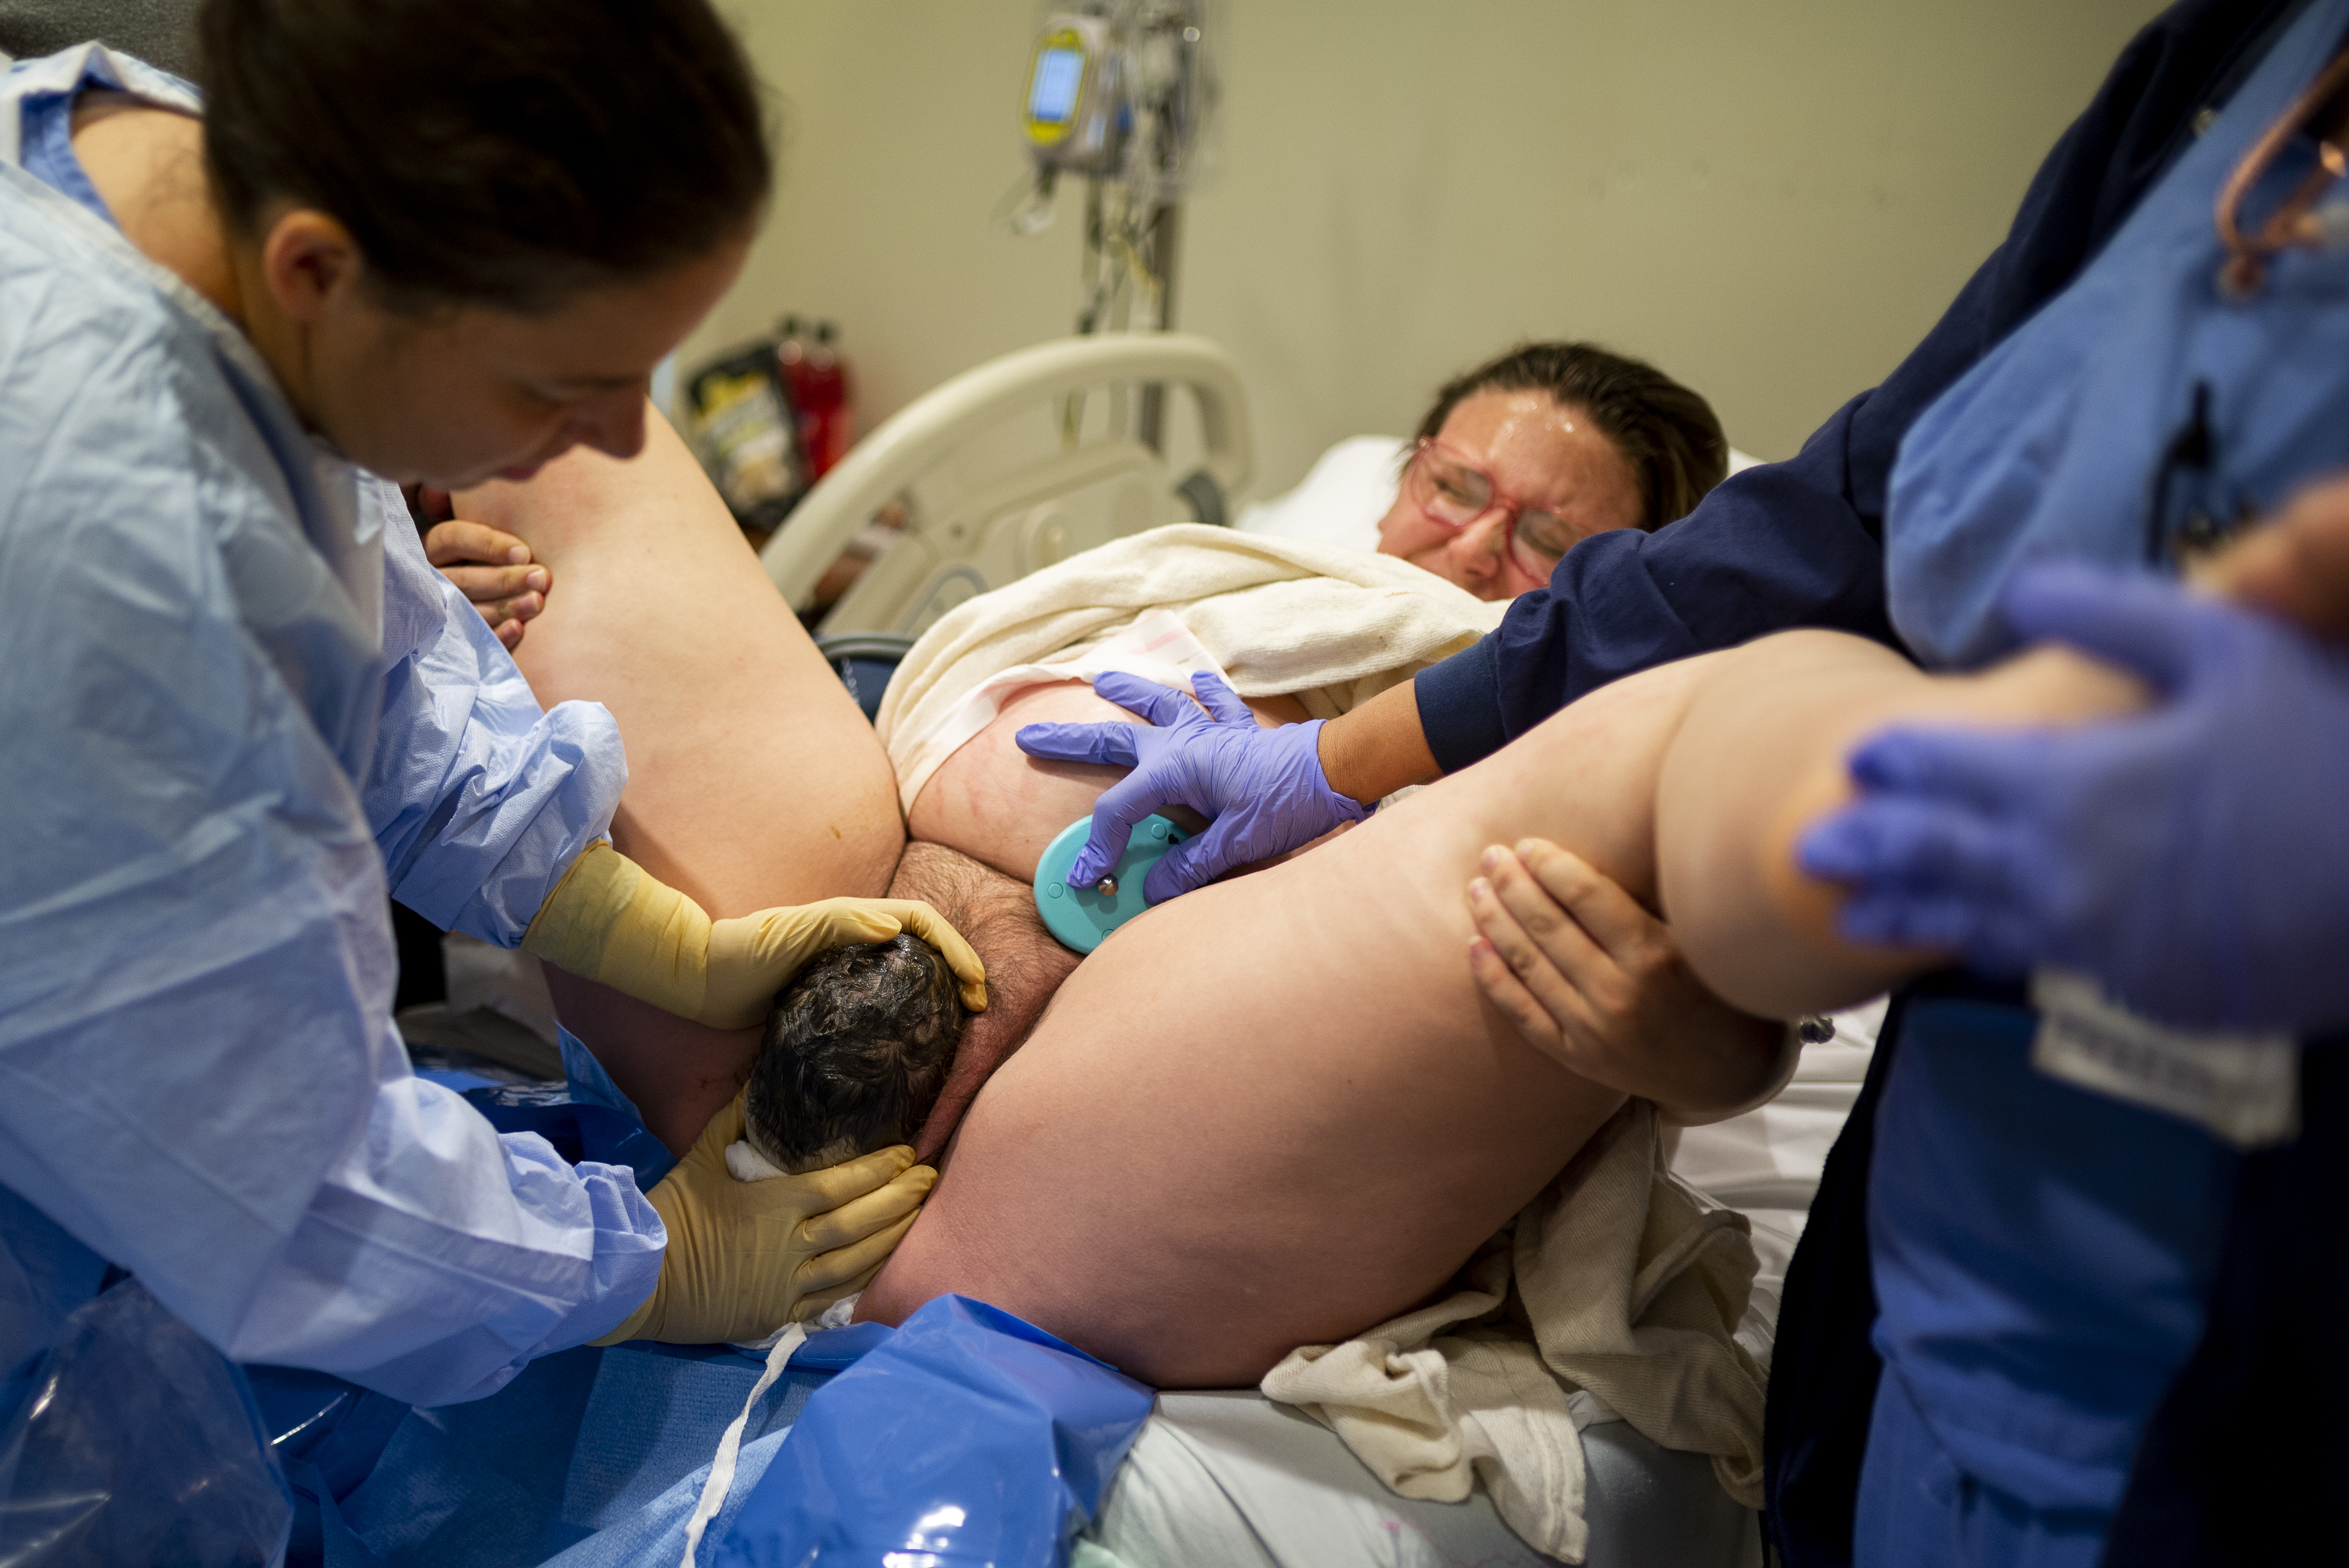 Baby Crowning at hospital birth in Annapolis, MD